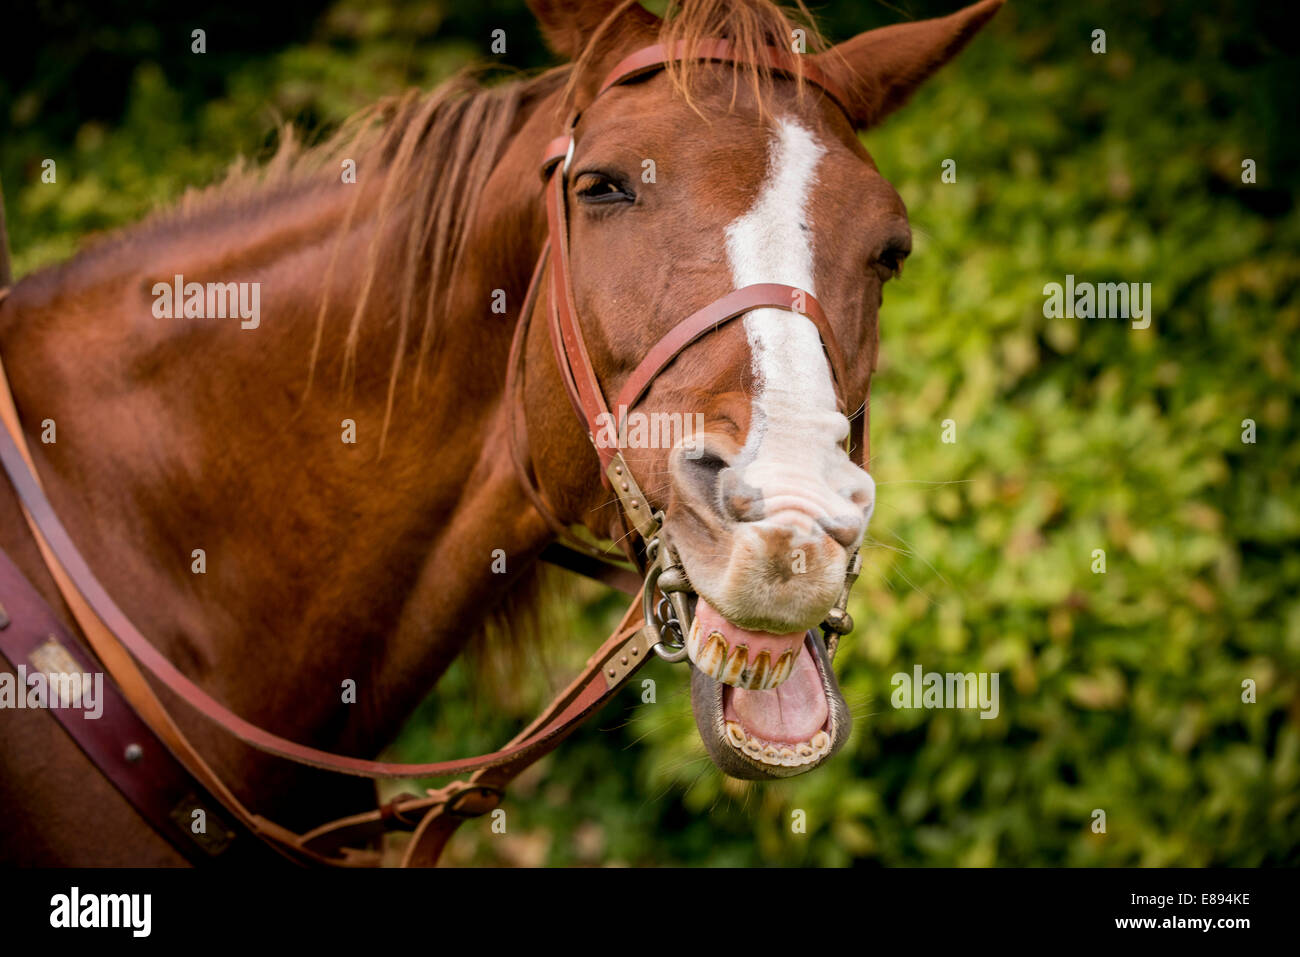 A close-up head of horse appearing to be laughing. Stock Photo